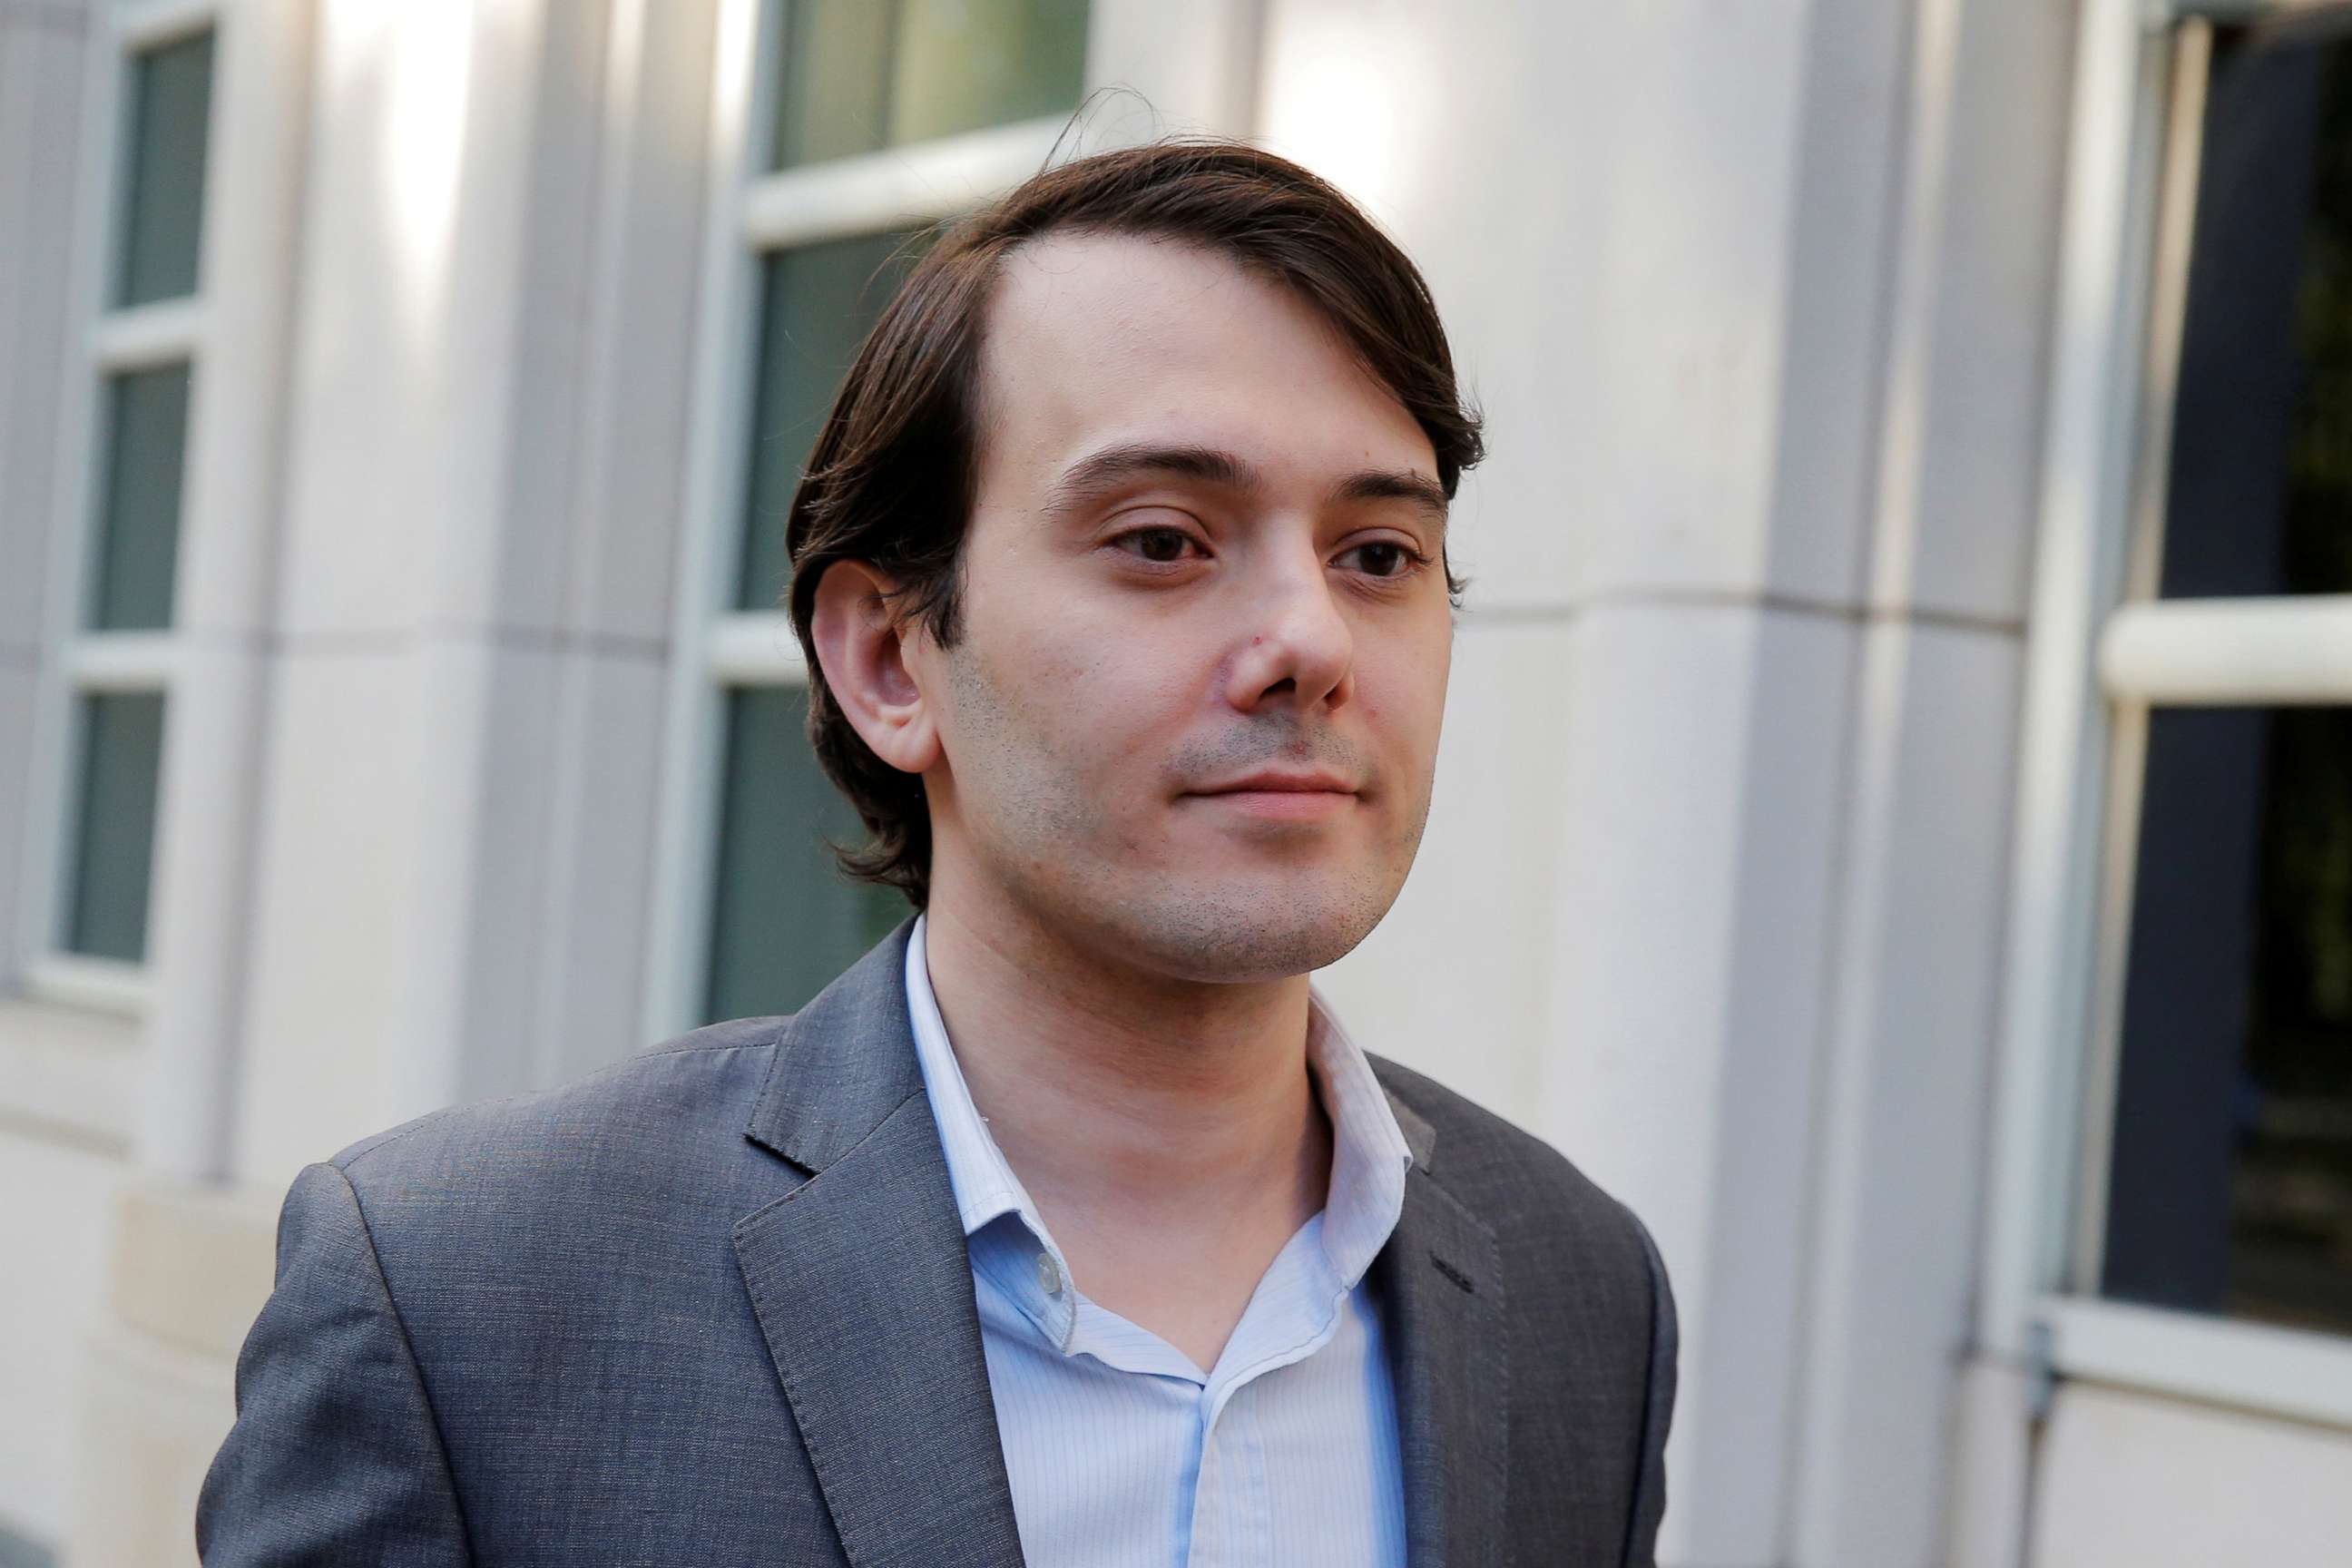 PHOTO: In this June 26, 2017, file photo, Martin Shkreli, former chief executive officer of Turing Pharmaceuticals and KaloBios Pharmaceuticals Inc, departs after a hearing at U.S. Federal Court in Brooklyn, New York.